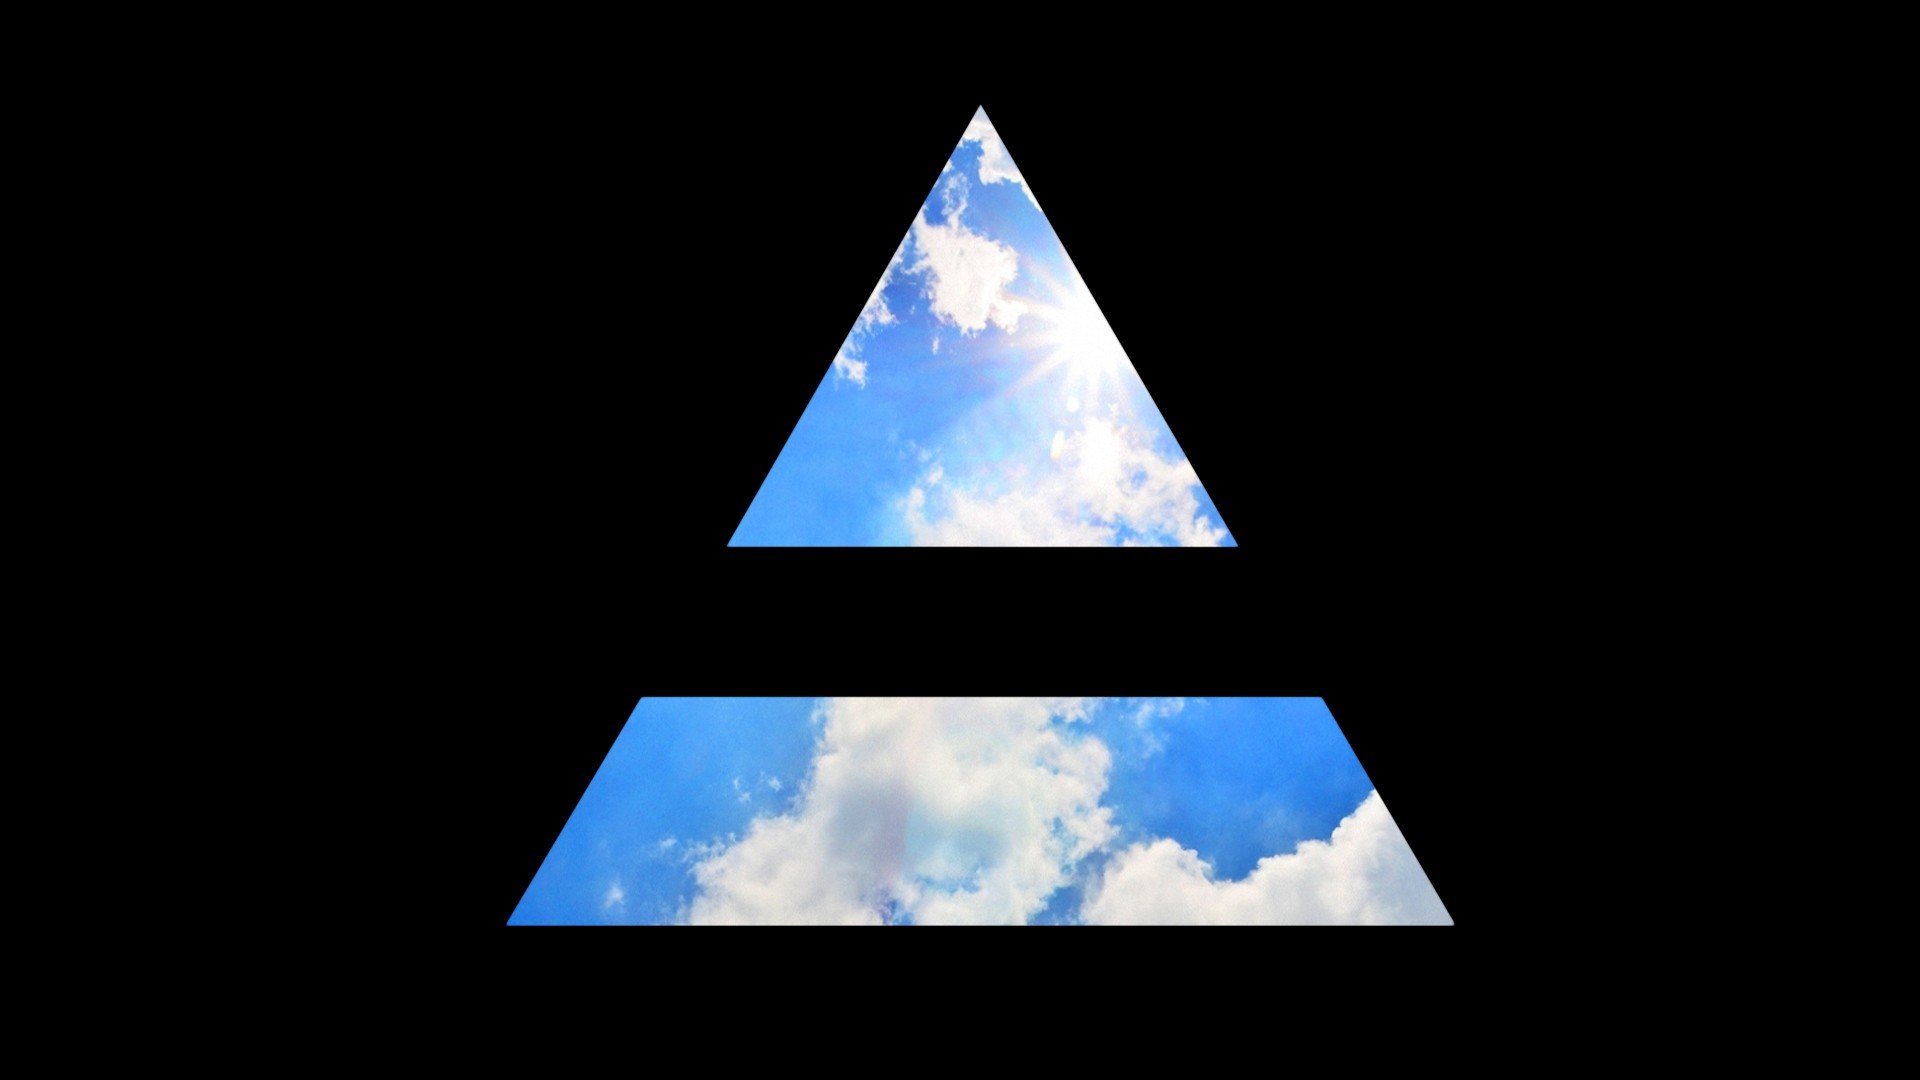 Thirty Seconds To Mars, 30 seconds to mars, Jared Leto, Mars, Triangle Wallpaper